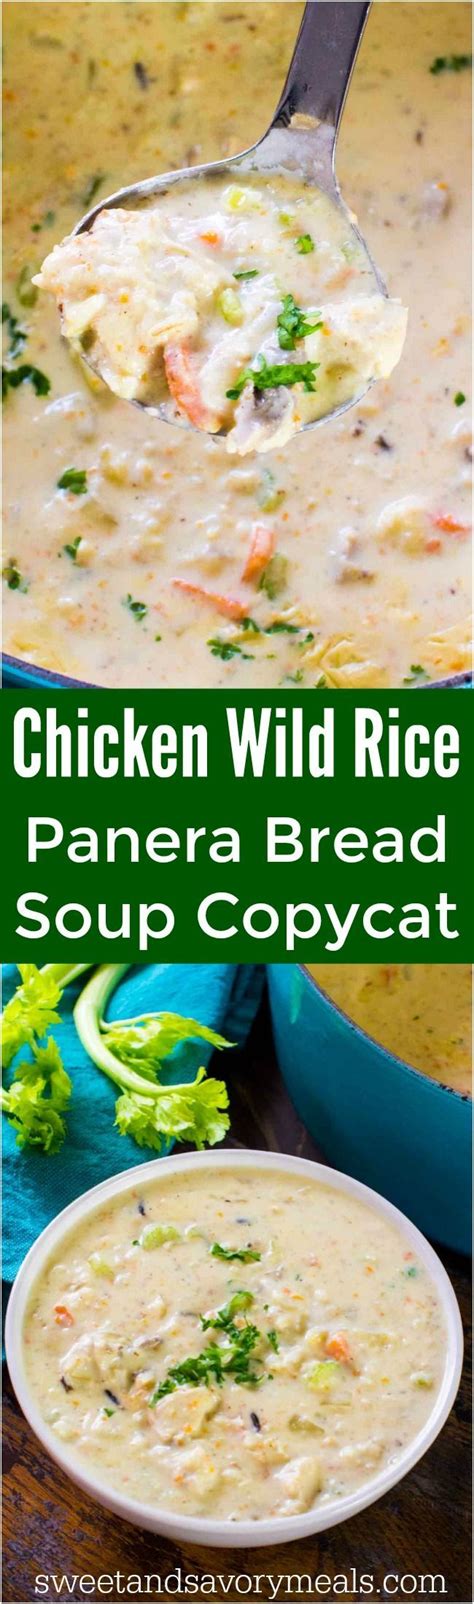 Cook about 30 minutes or until the rice is cooked through. Panera Bread Chicken Wild Rice Soup | Recipe | Easy soup ...